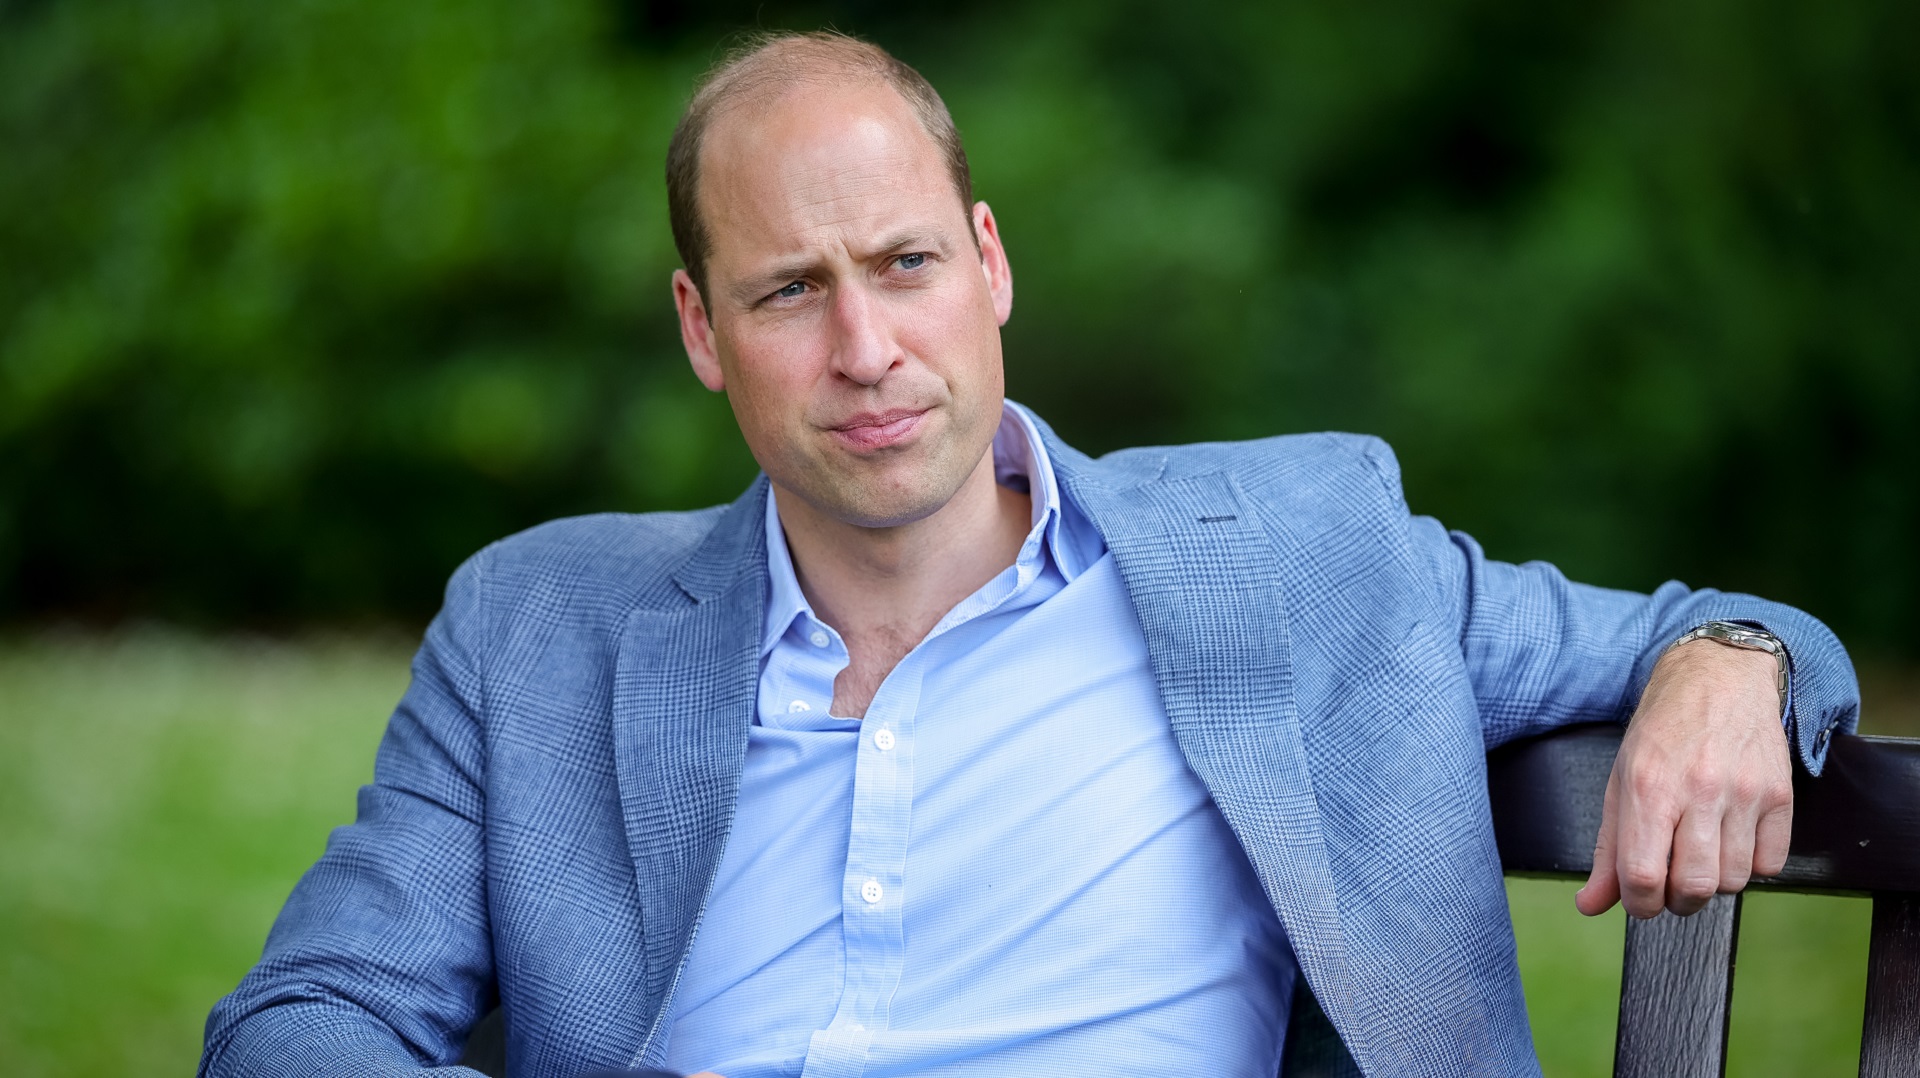 Prince William launches Homewards project to end homelessness